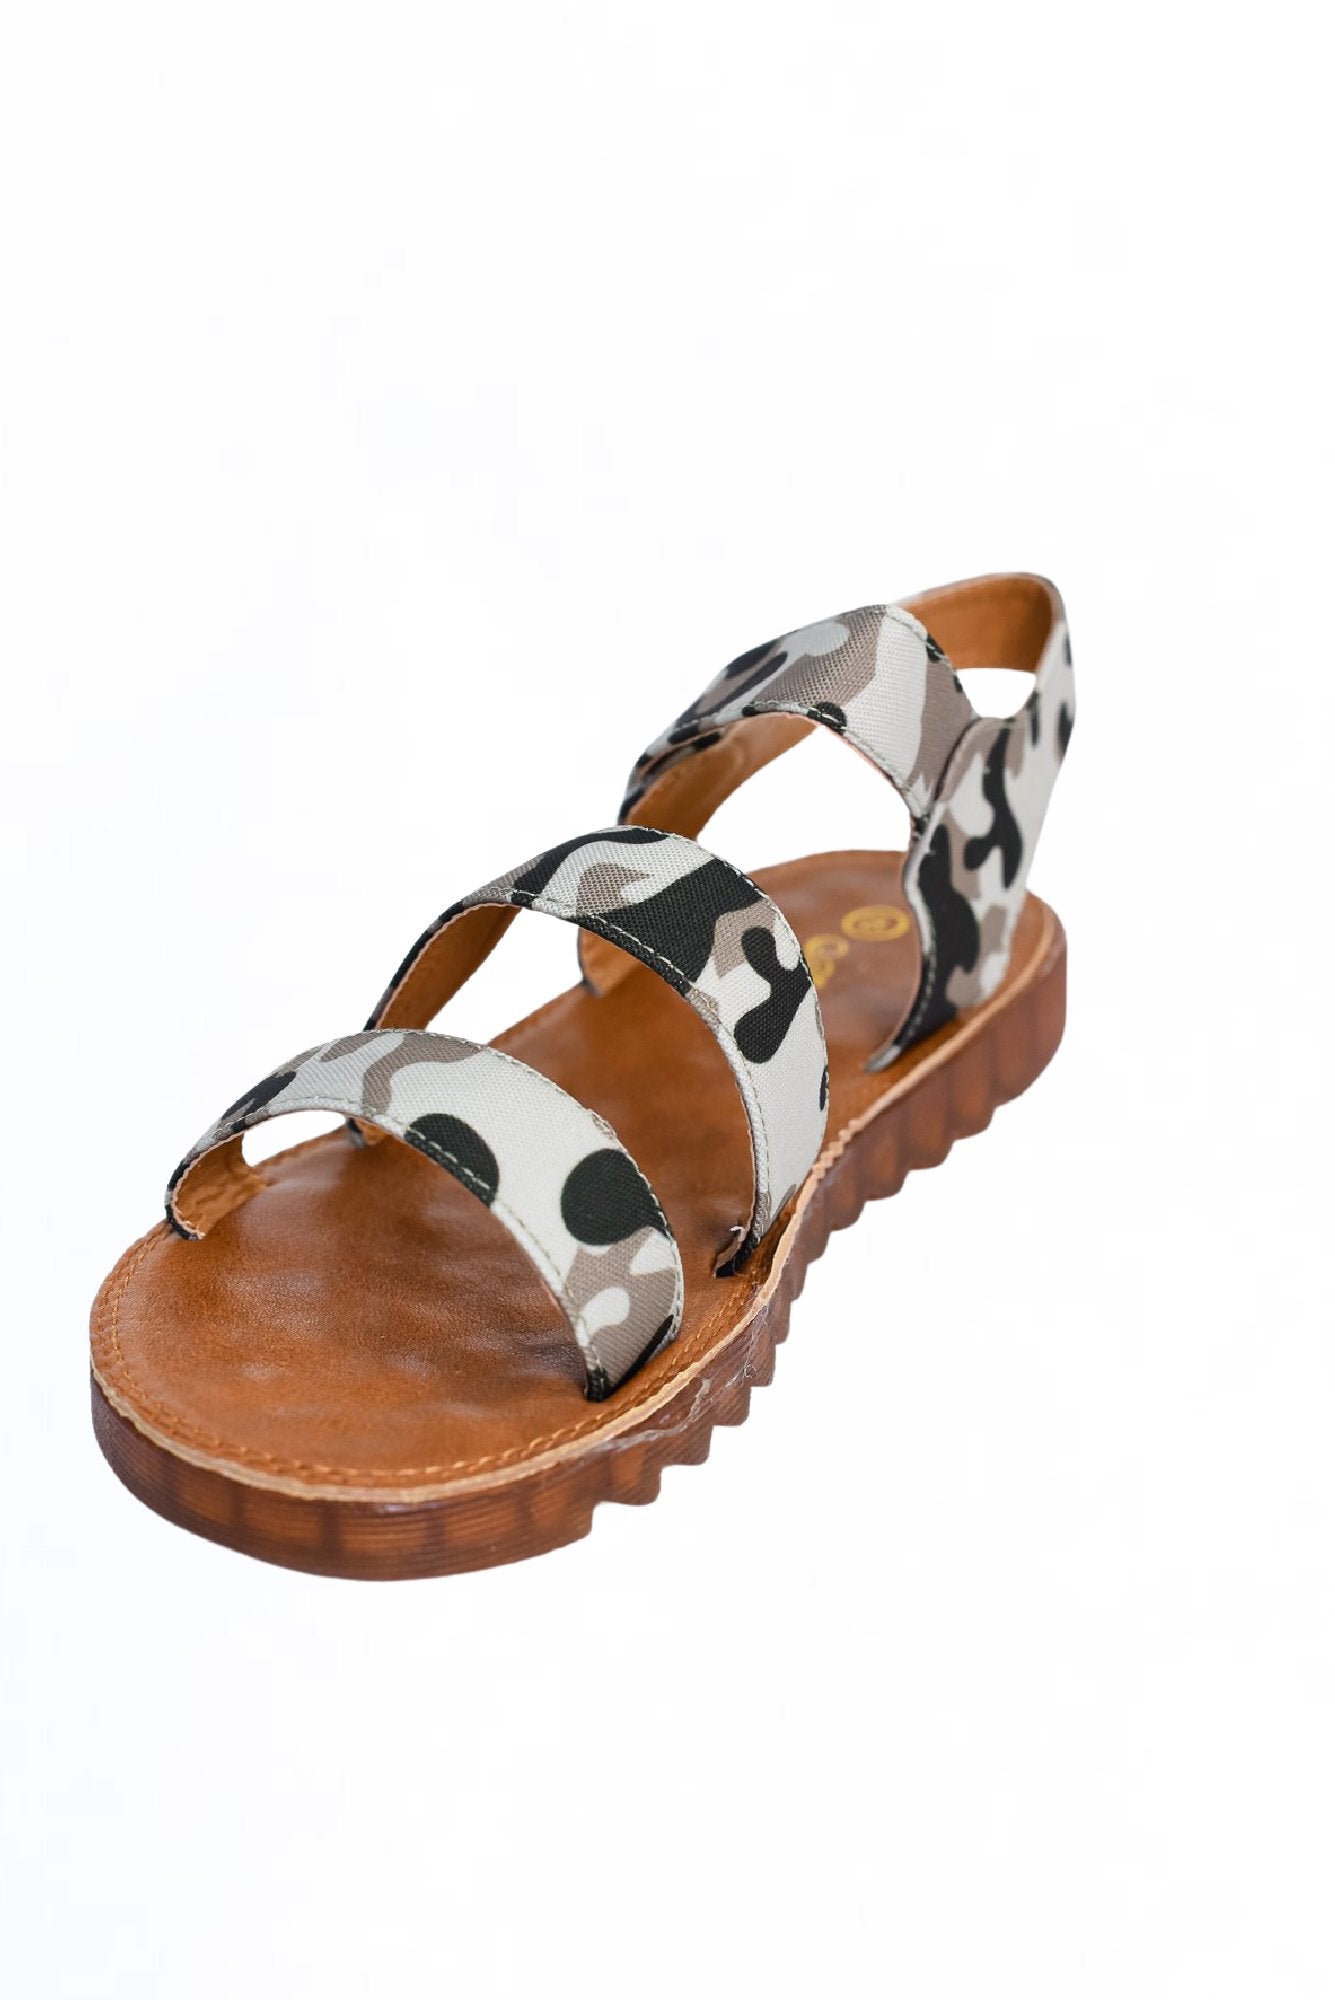 Summer Is Calling Camouflage Sandals - SHO2038OL